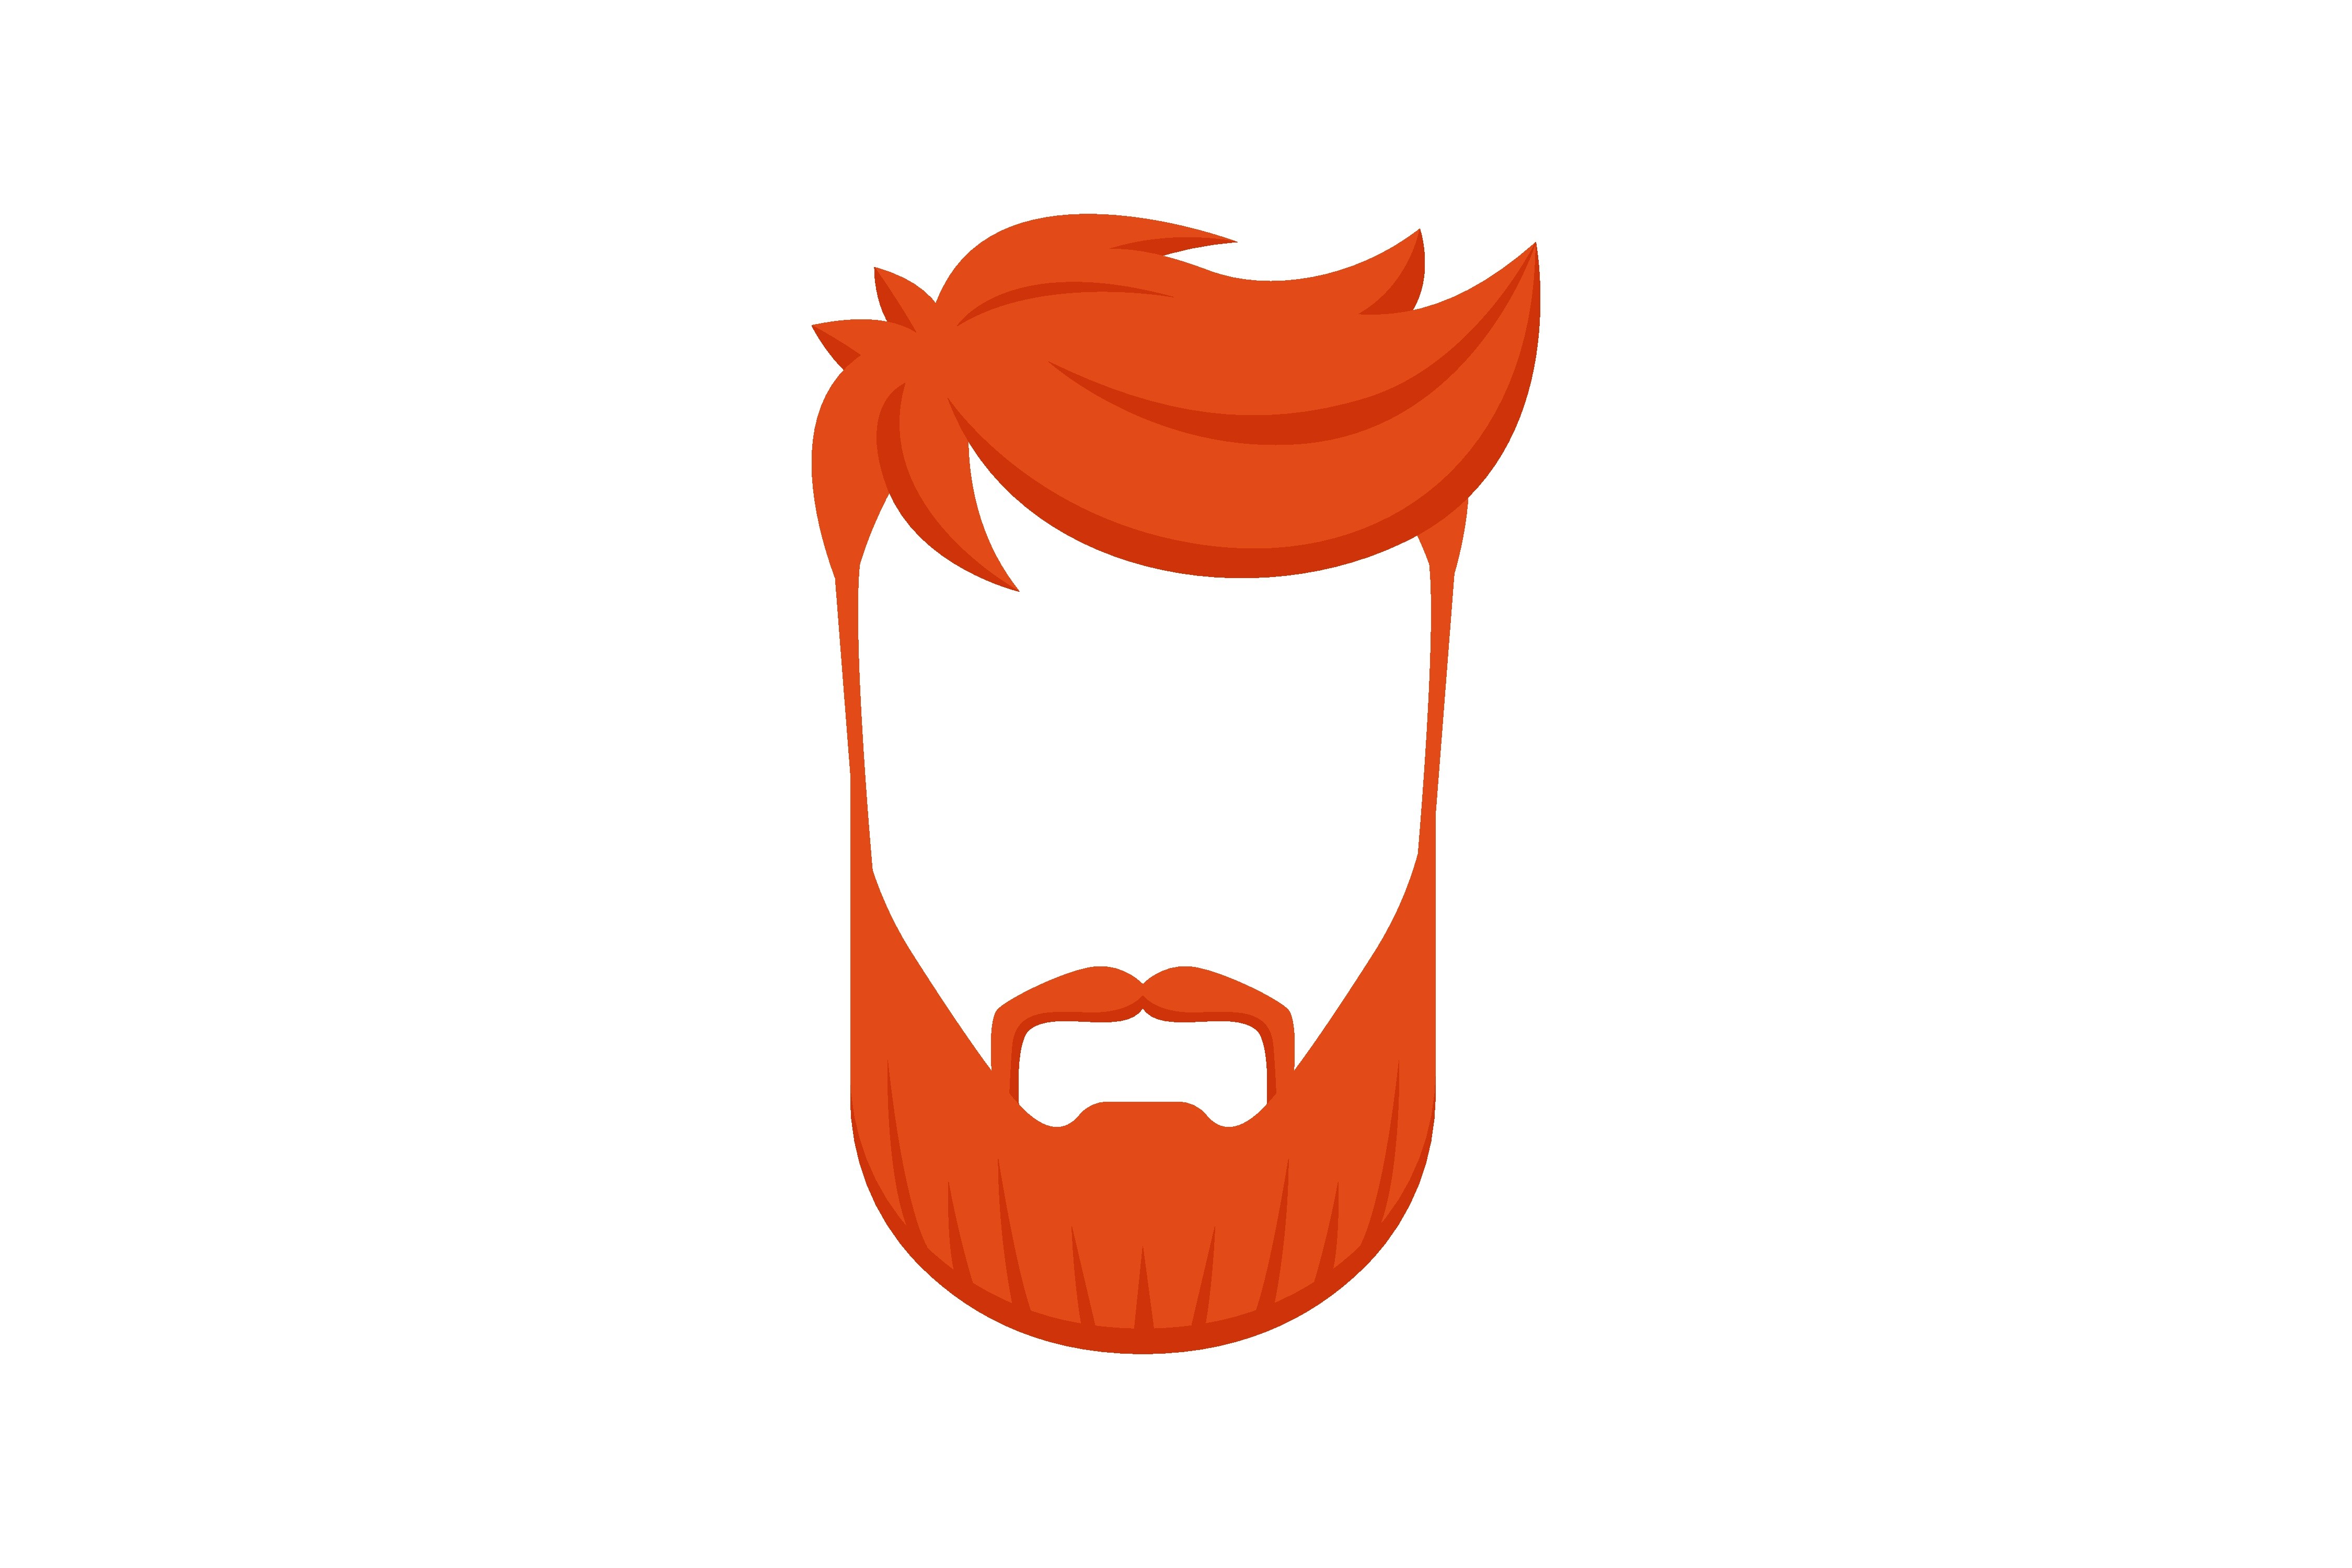 Hairstyle and Beard Flat Vector Illustra Graphic by pch.vector ...